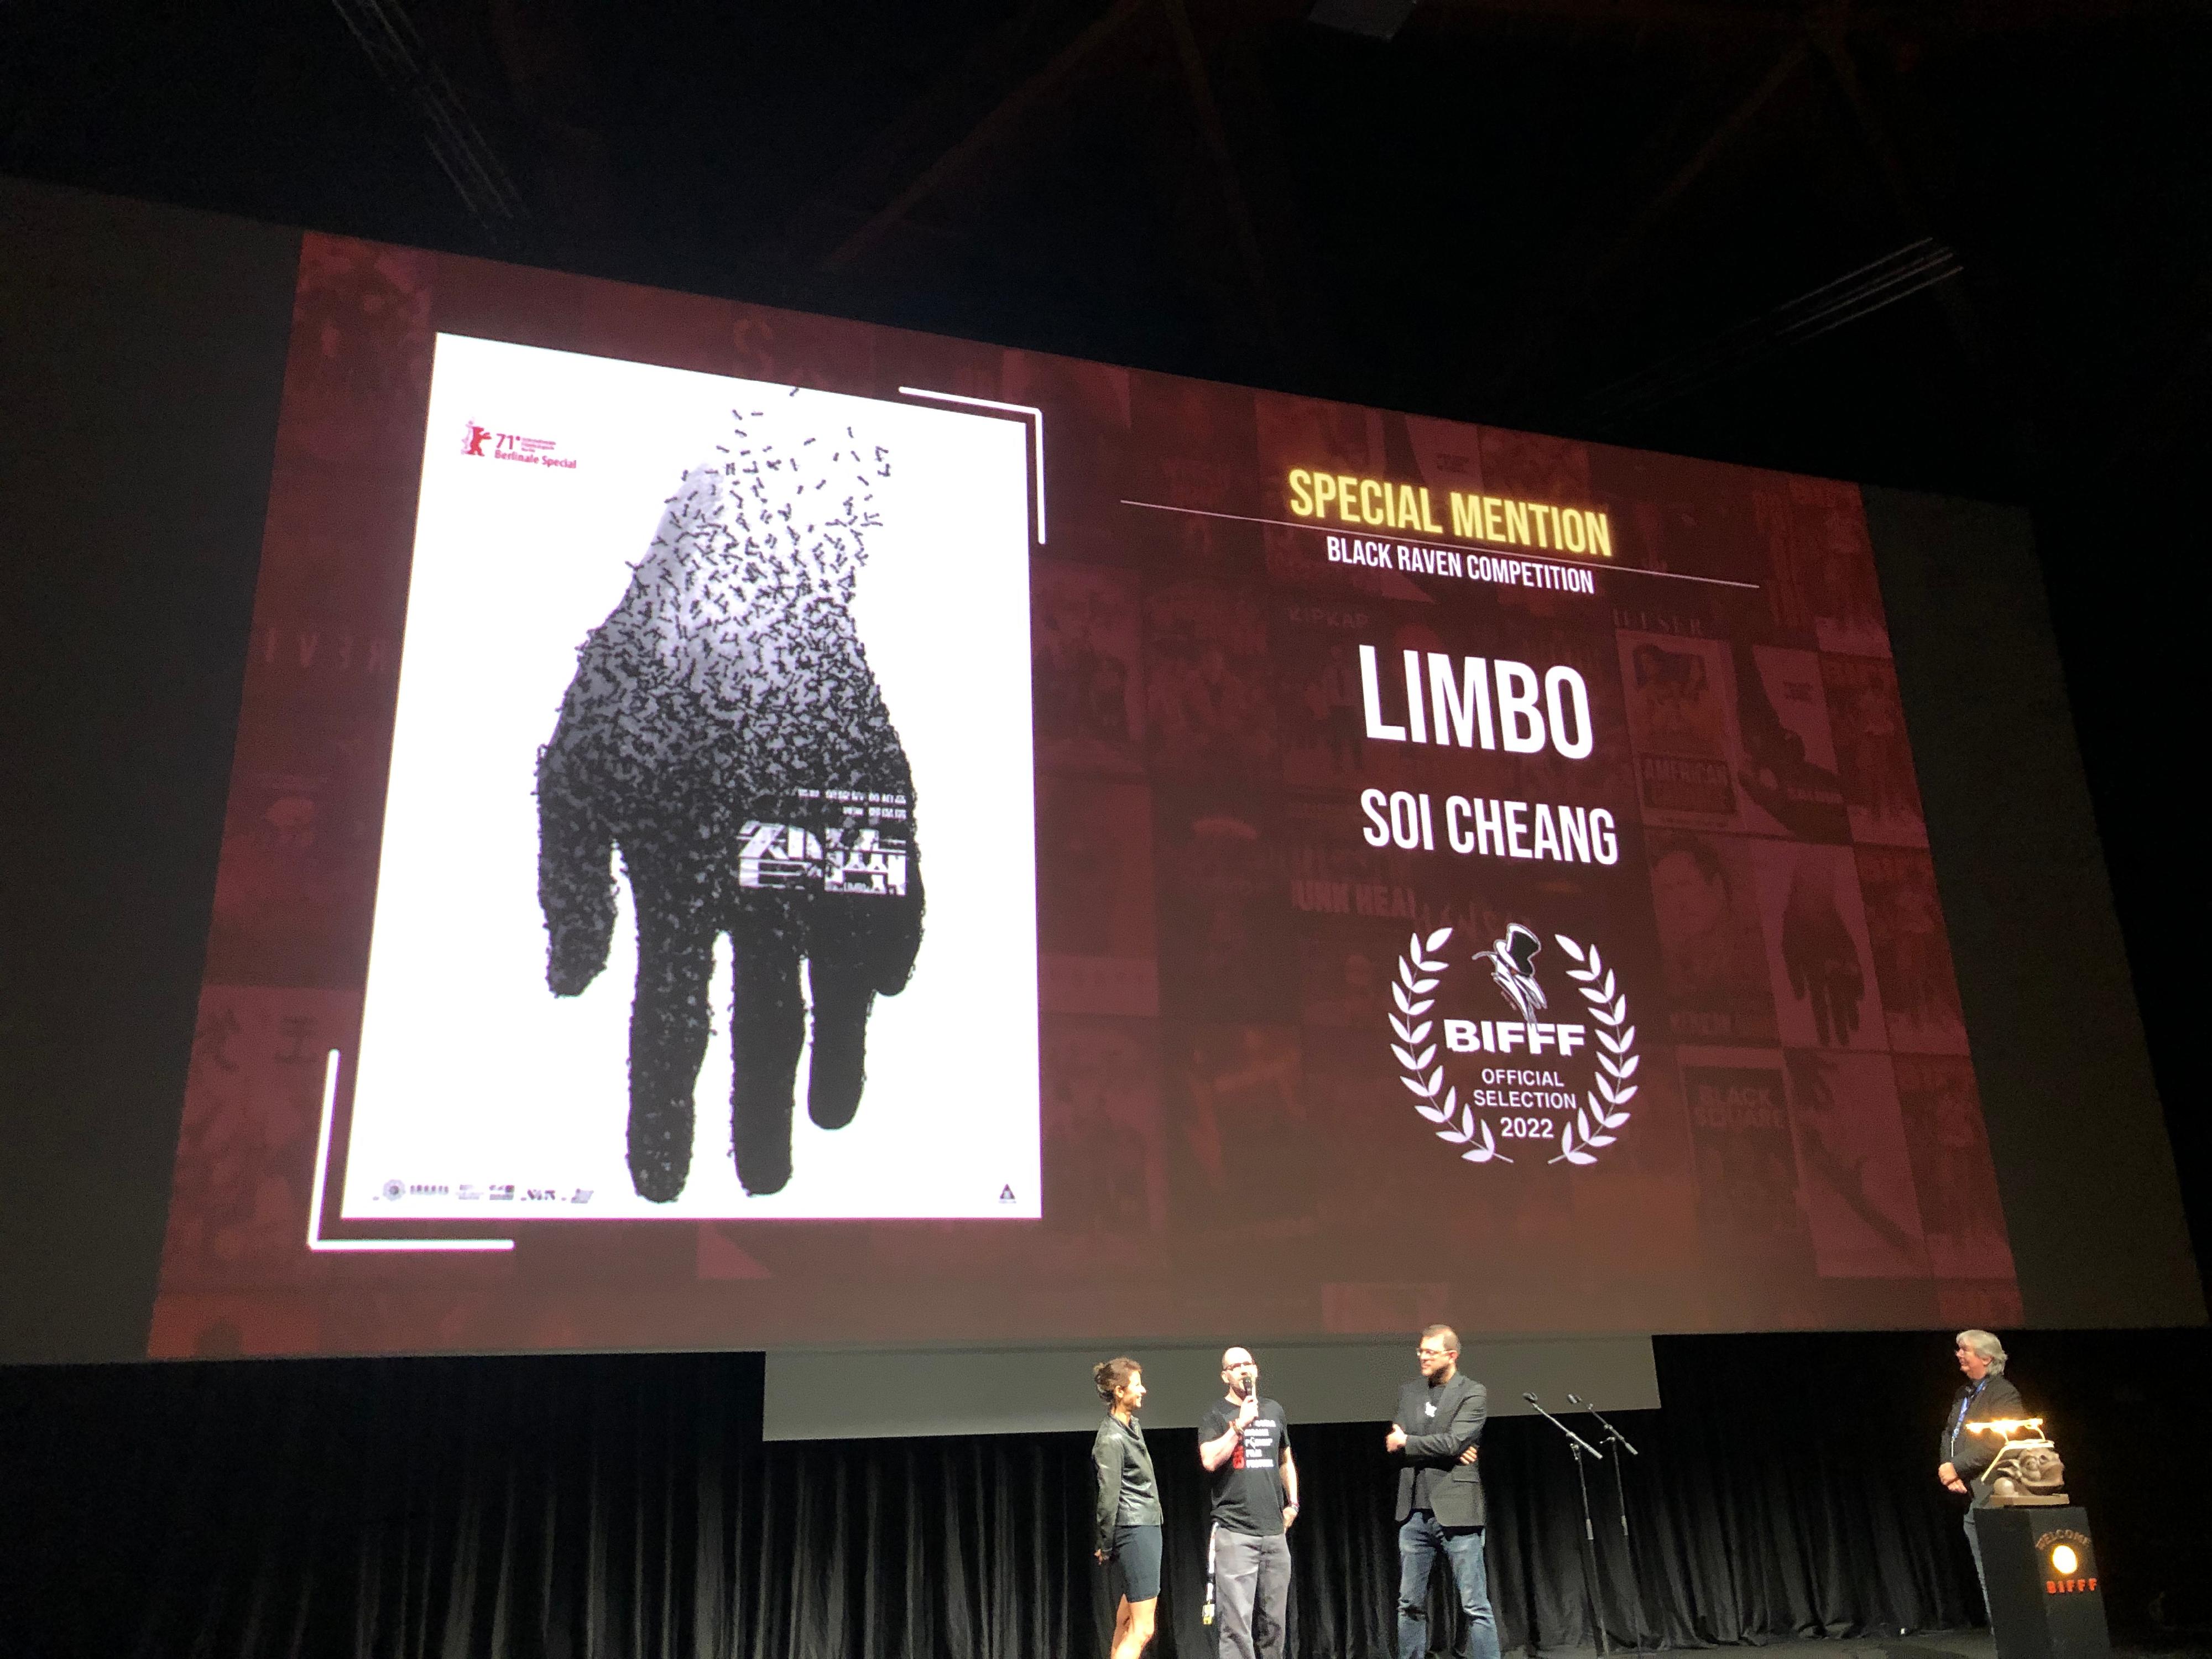 At the closing ceremony of the Brussels International Fantastic Film Festival in Brussels, Belgium on September 10 (Brussels time), Cheang Pou-soi's thriller "Limbo" received a Special Mention from the Jury.